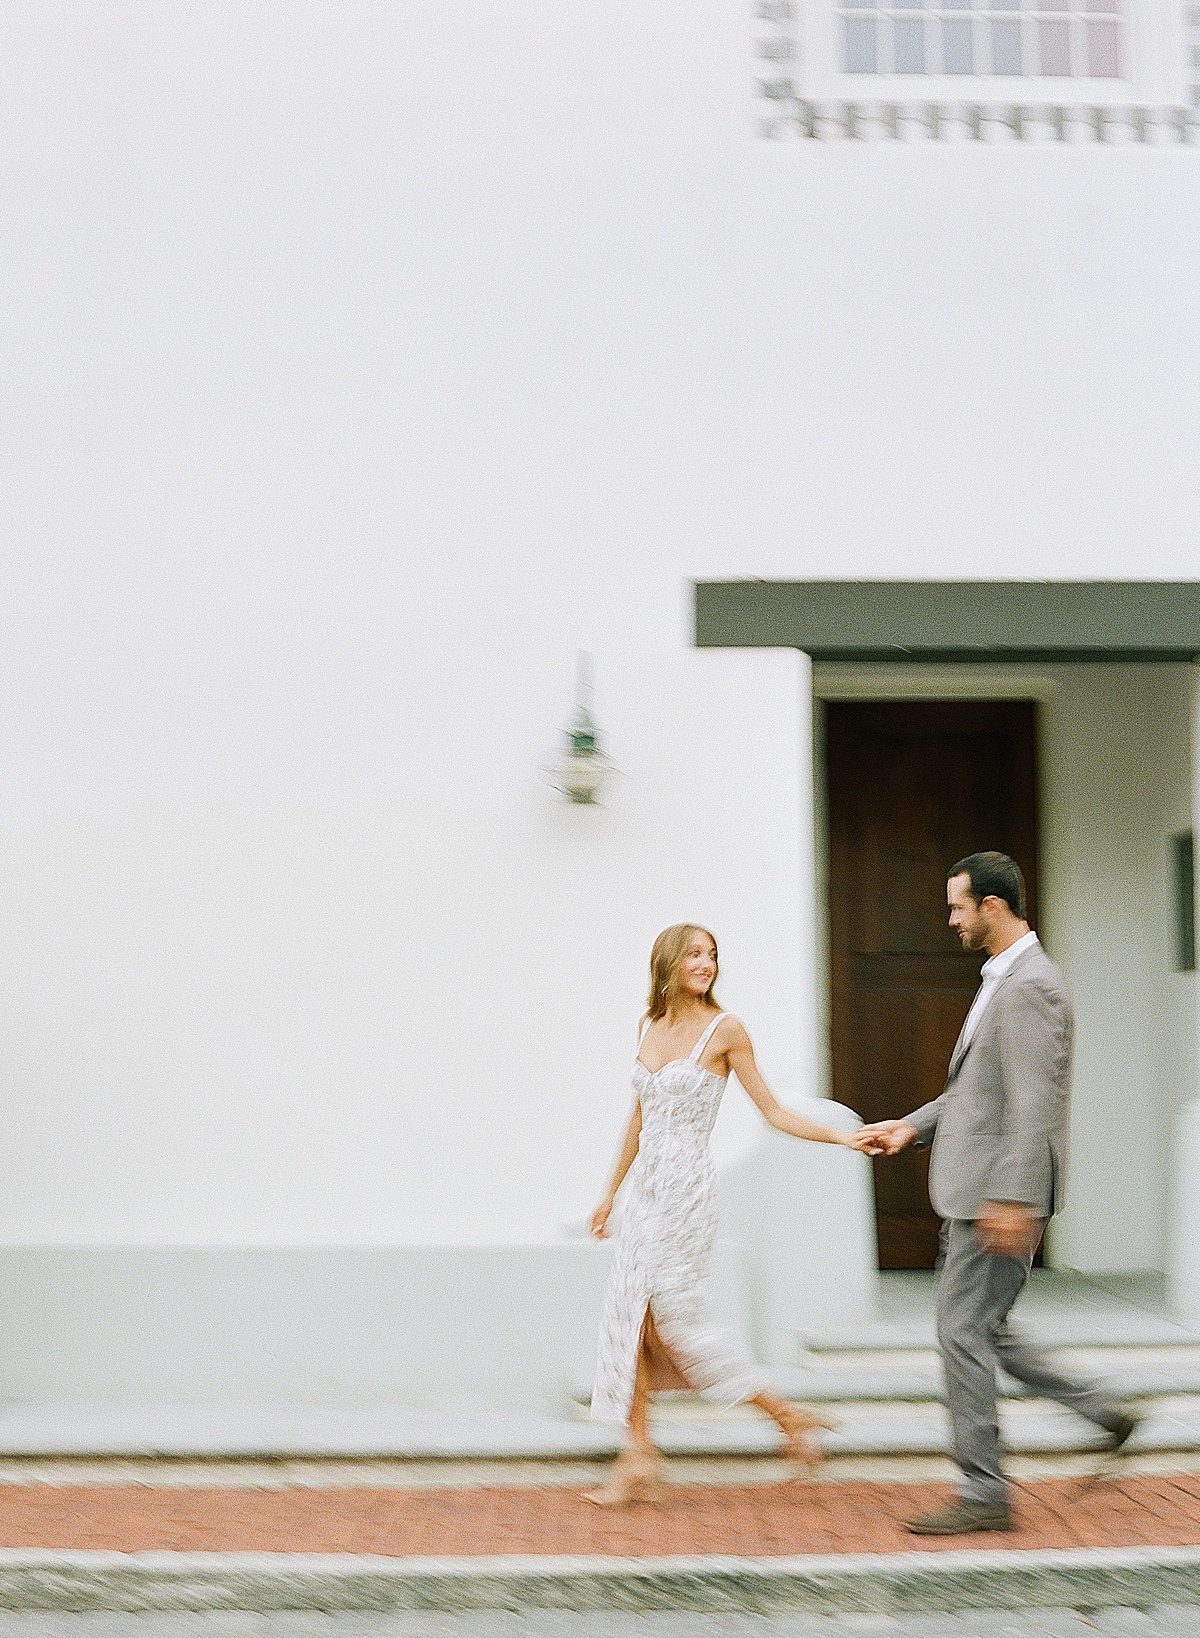 30A Wedding Photographer Captures Couple Walking in Motion Blur Photo